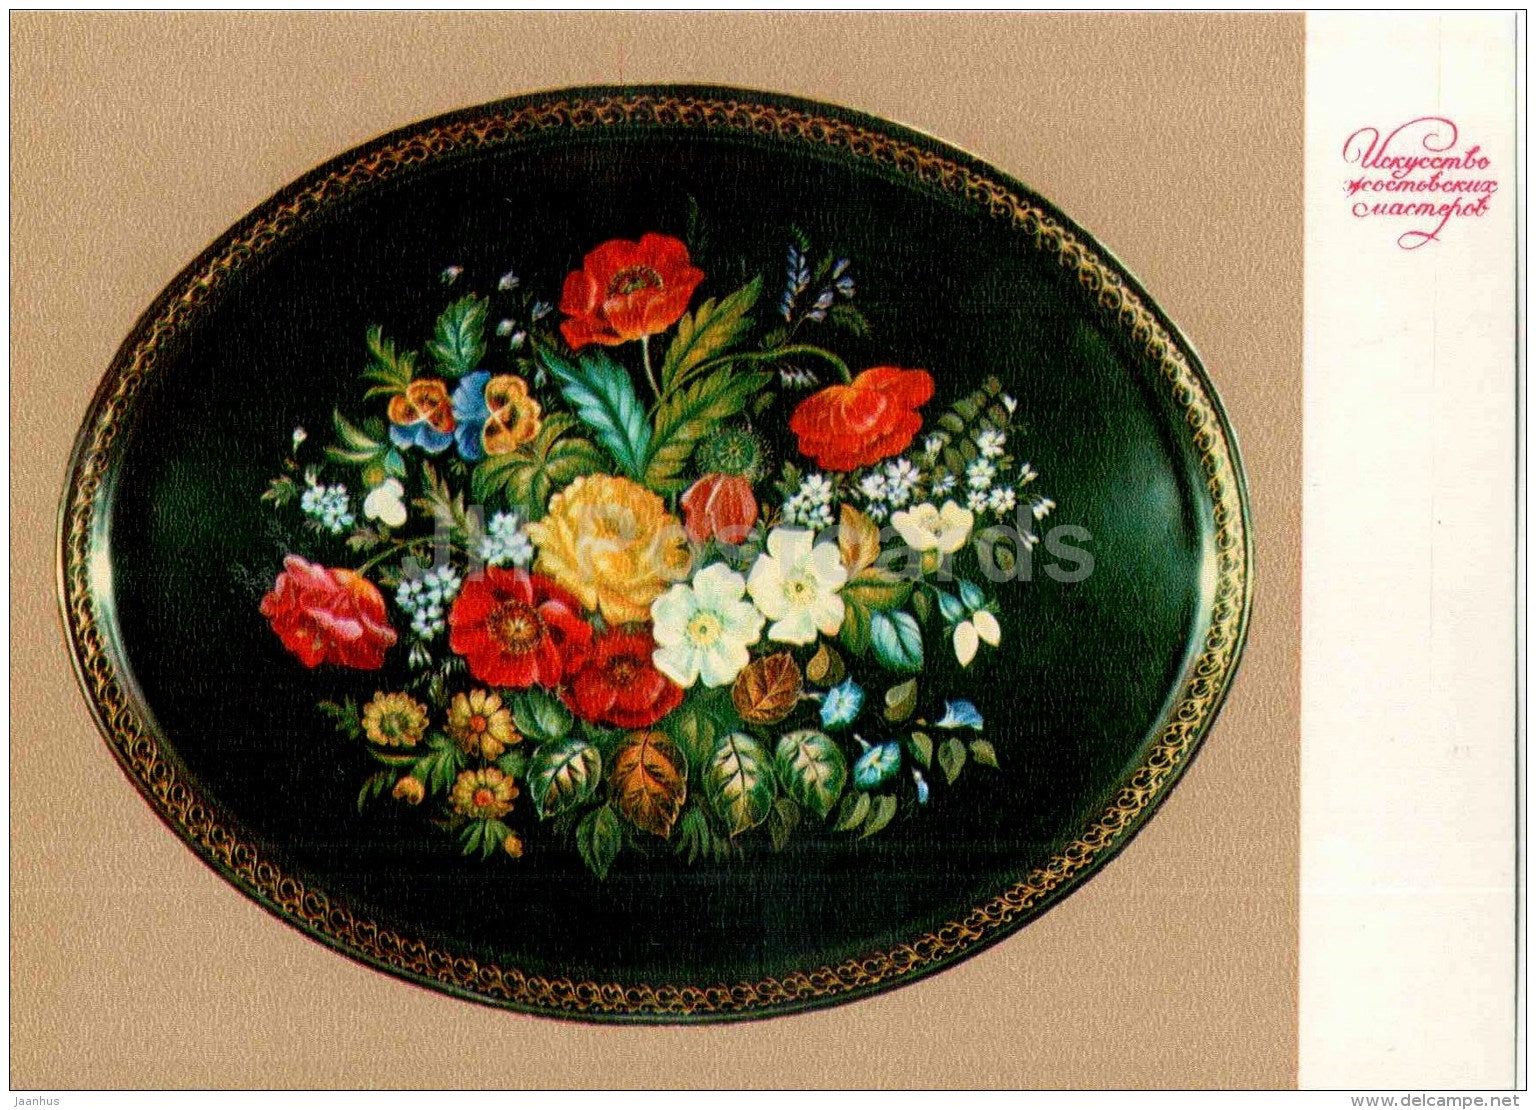 Bouquet with Poppies by P. Plakhov - Art of Zhostovo Masters - folk art - decorated trays - 1979 - Russia USSR - unused - JH Postcards